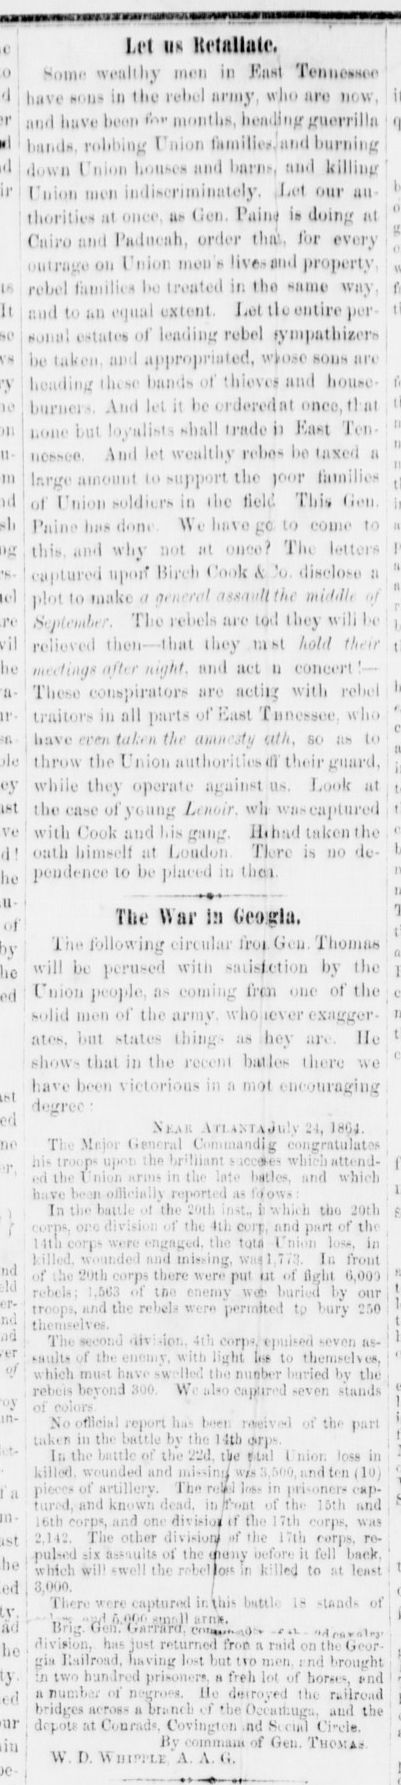 Brownlow's Knoxville Whig and Rebel Ventilatorb article 6